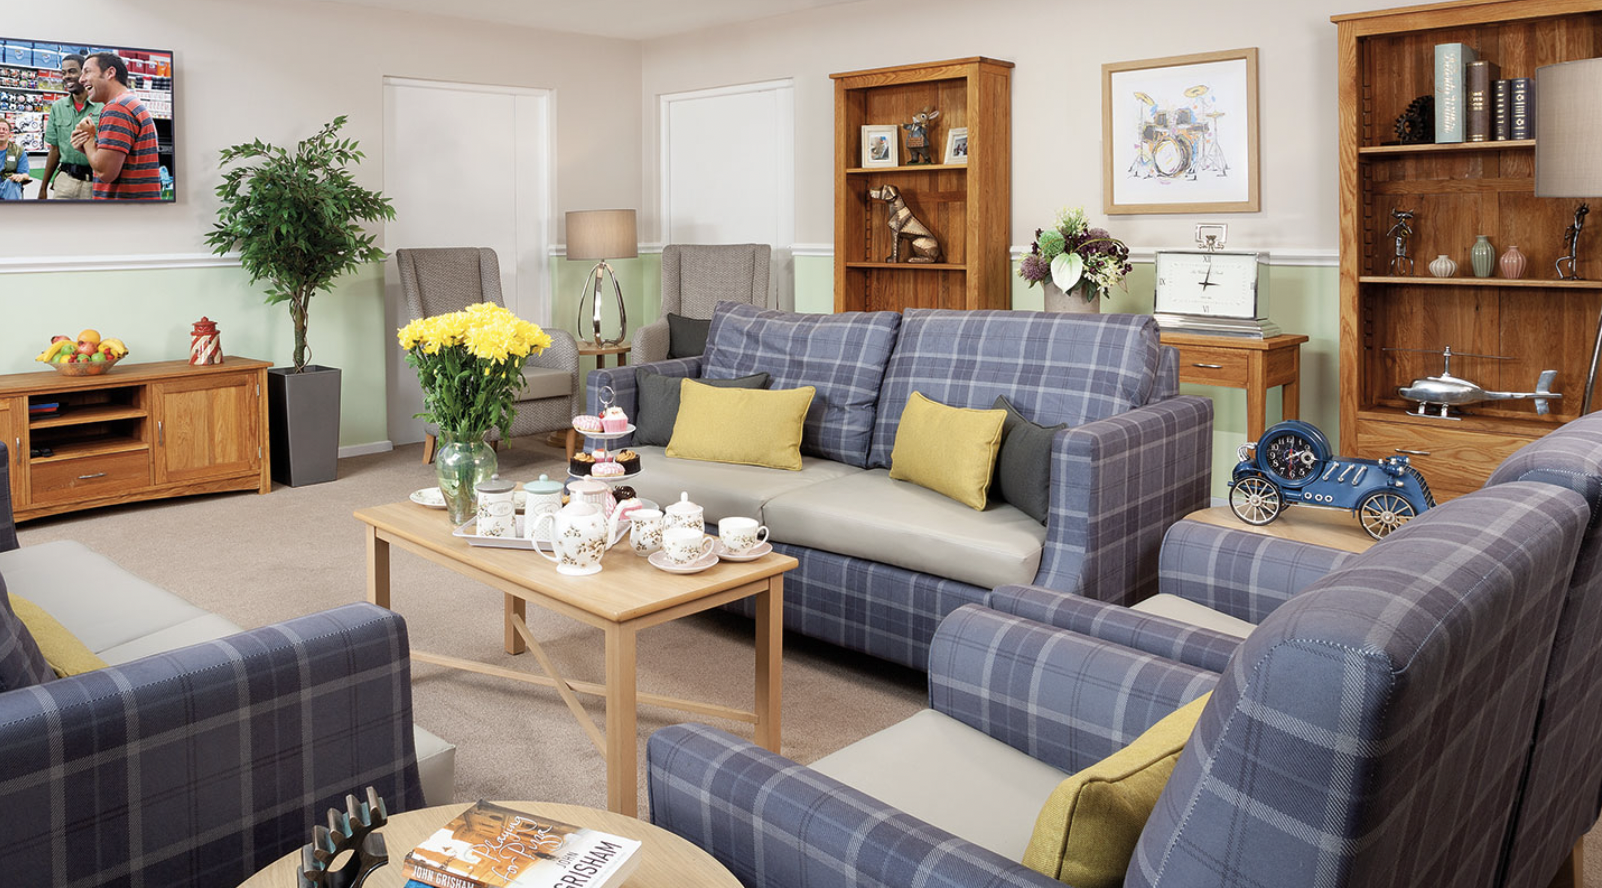 Abbey Healthcare - Wrottesley Park House care home 3